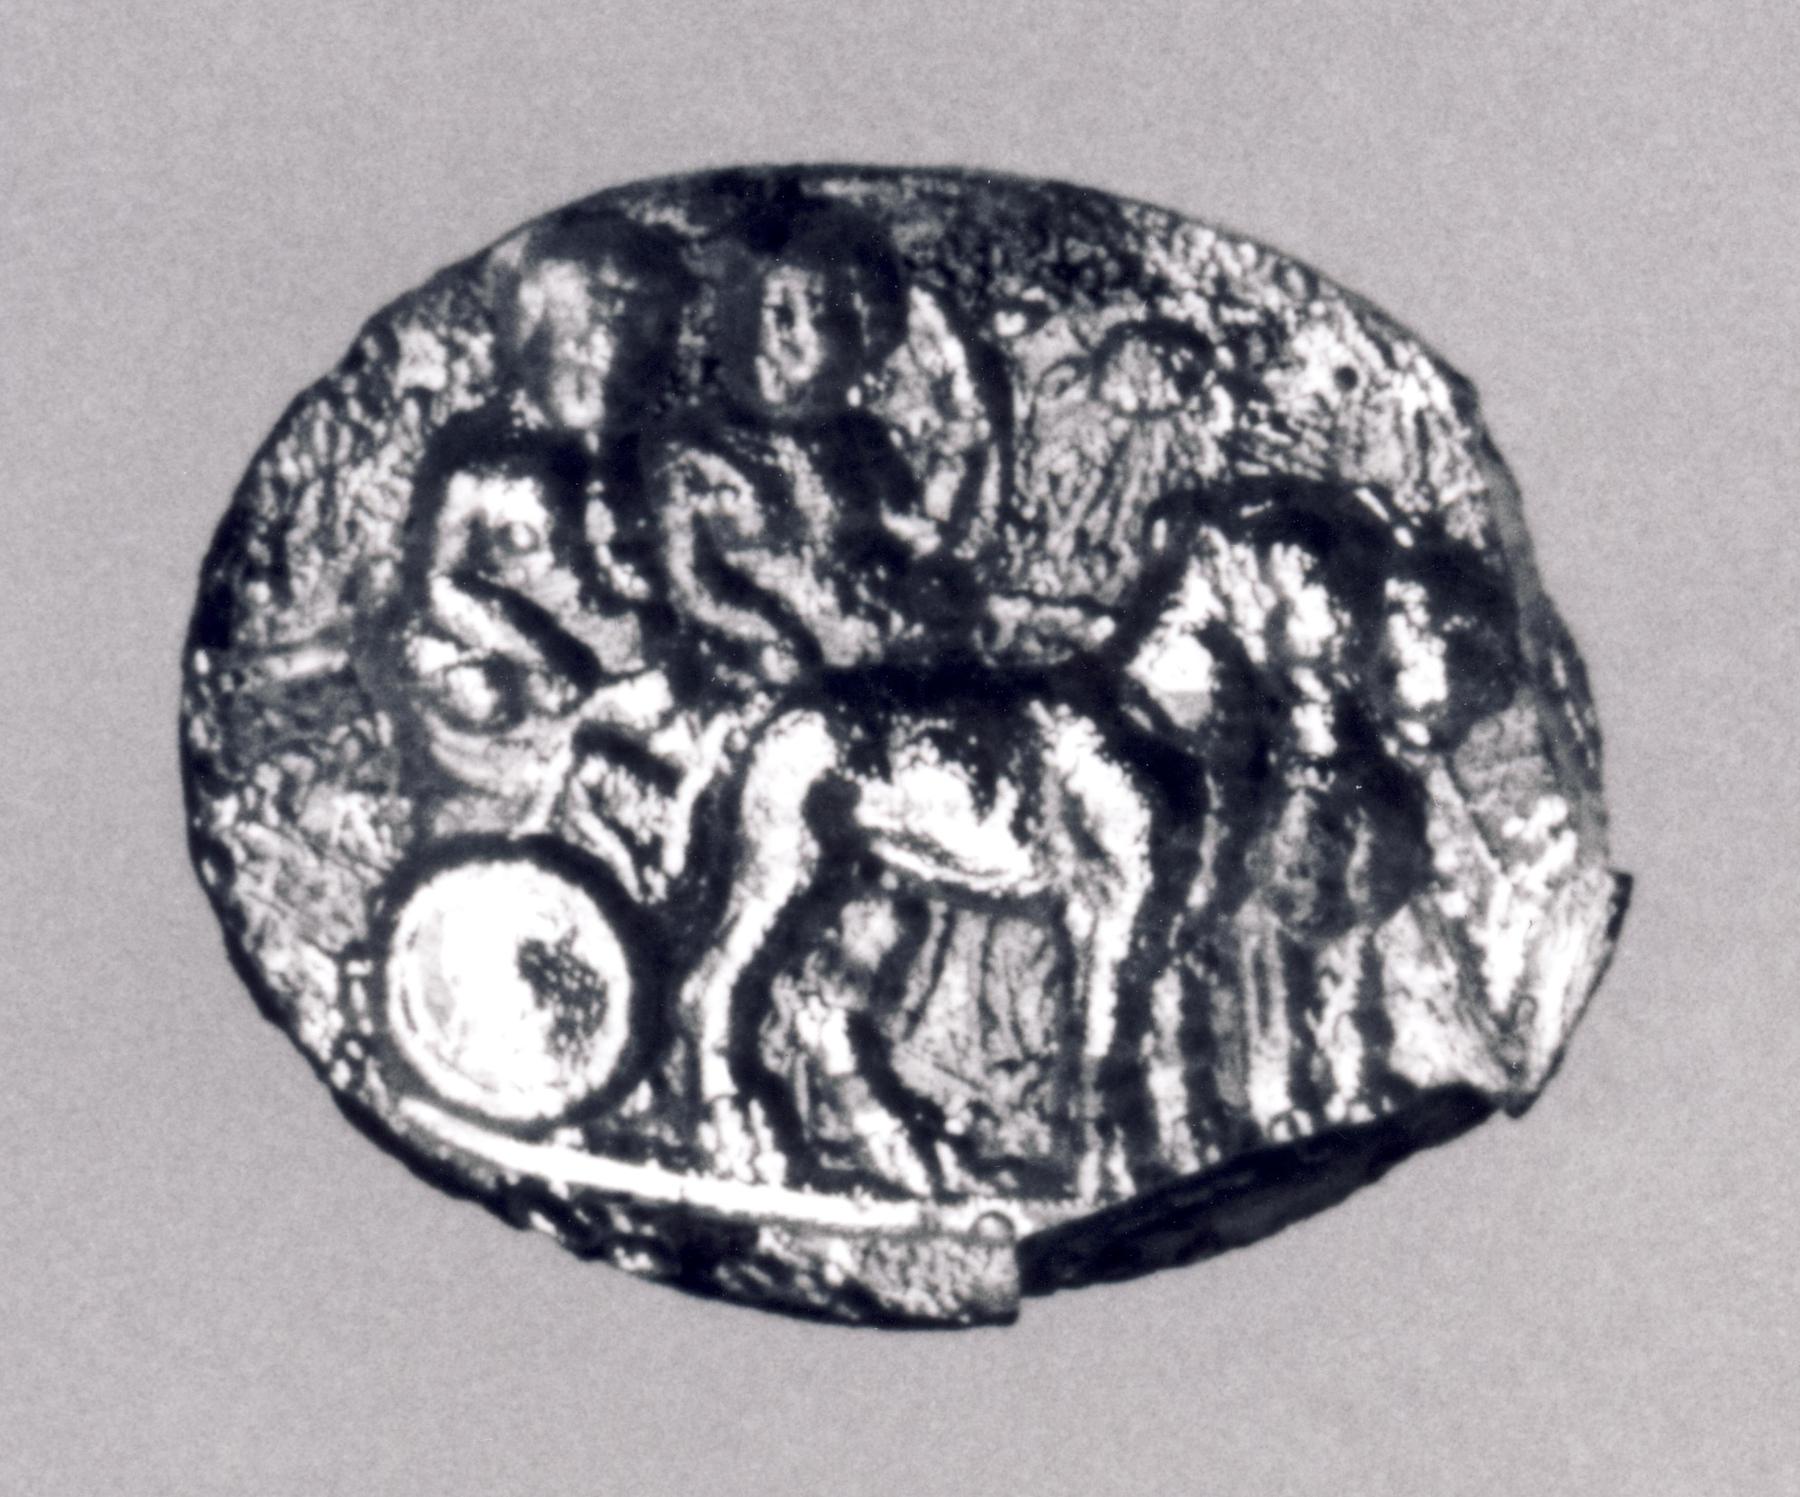 Dionysus and Ariadne in a cart drawn by two panthers, I338